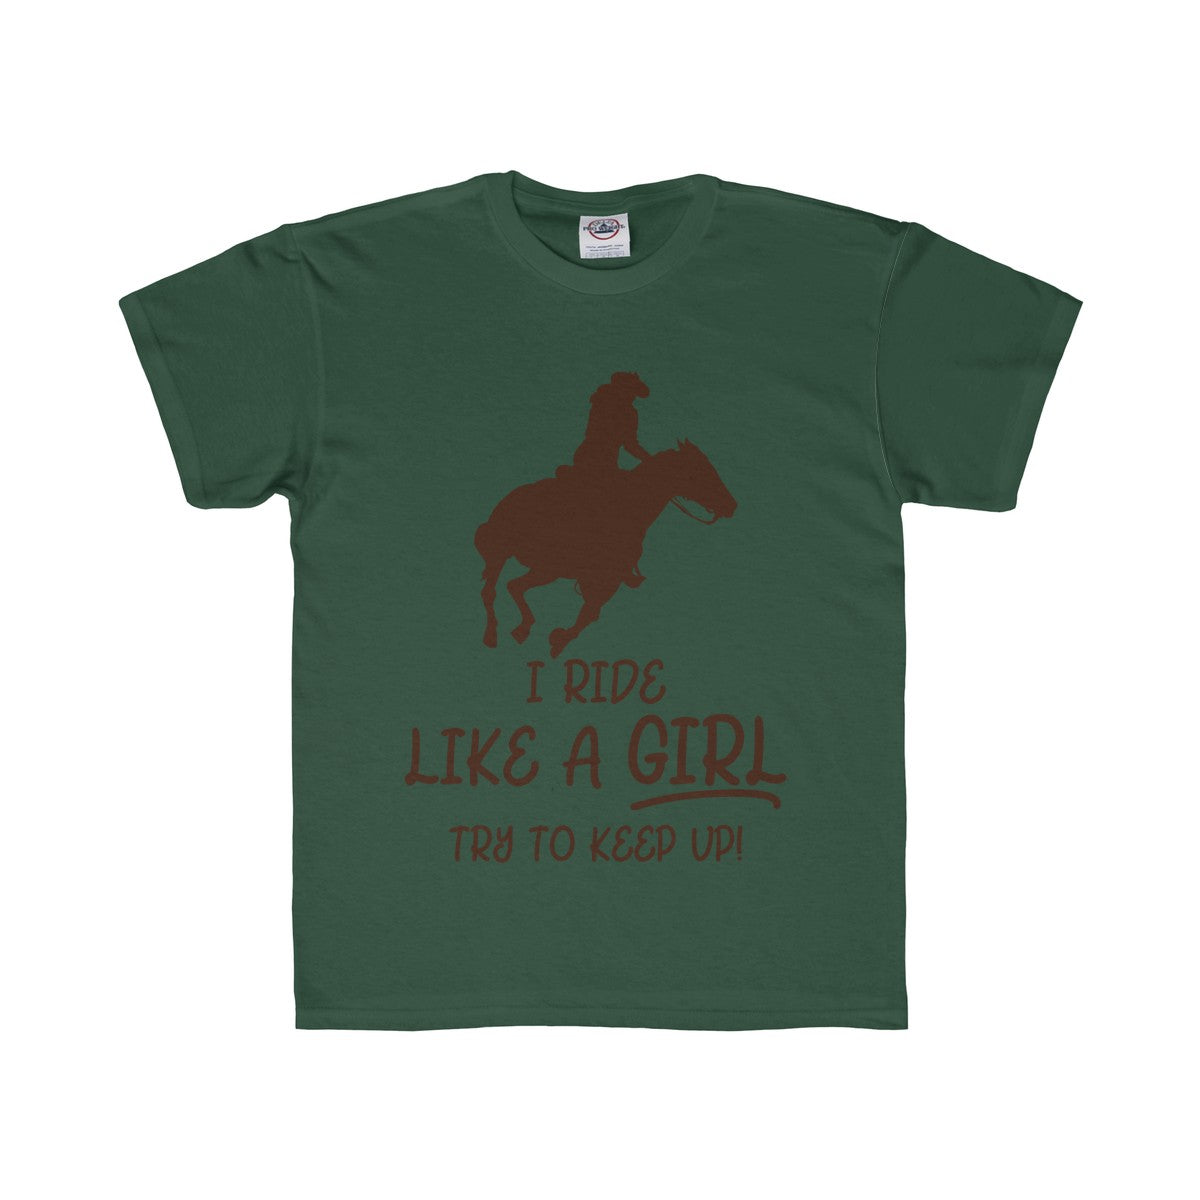 I Ride Like a Girl Try to Keep Up Kids Regular Fit Tee-Kids clothes-PureDesignTees